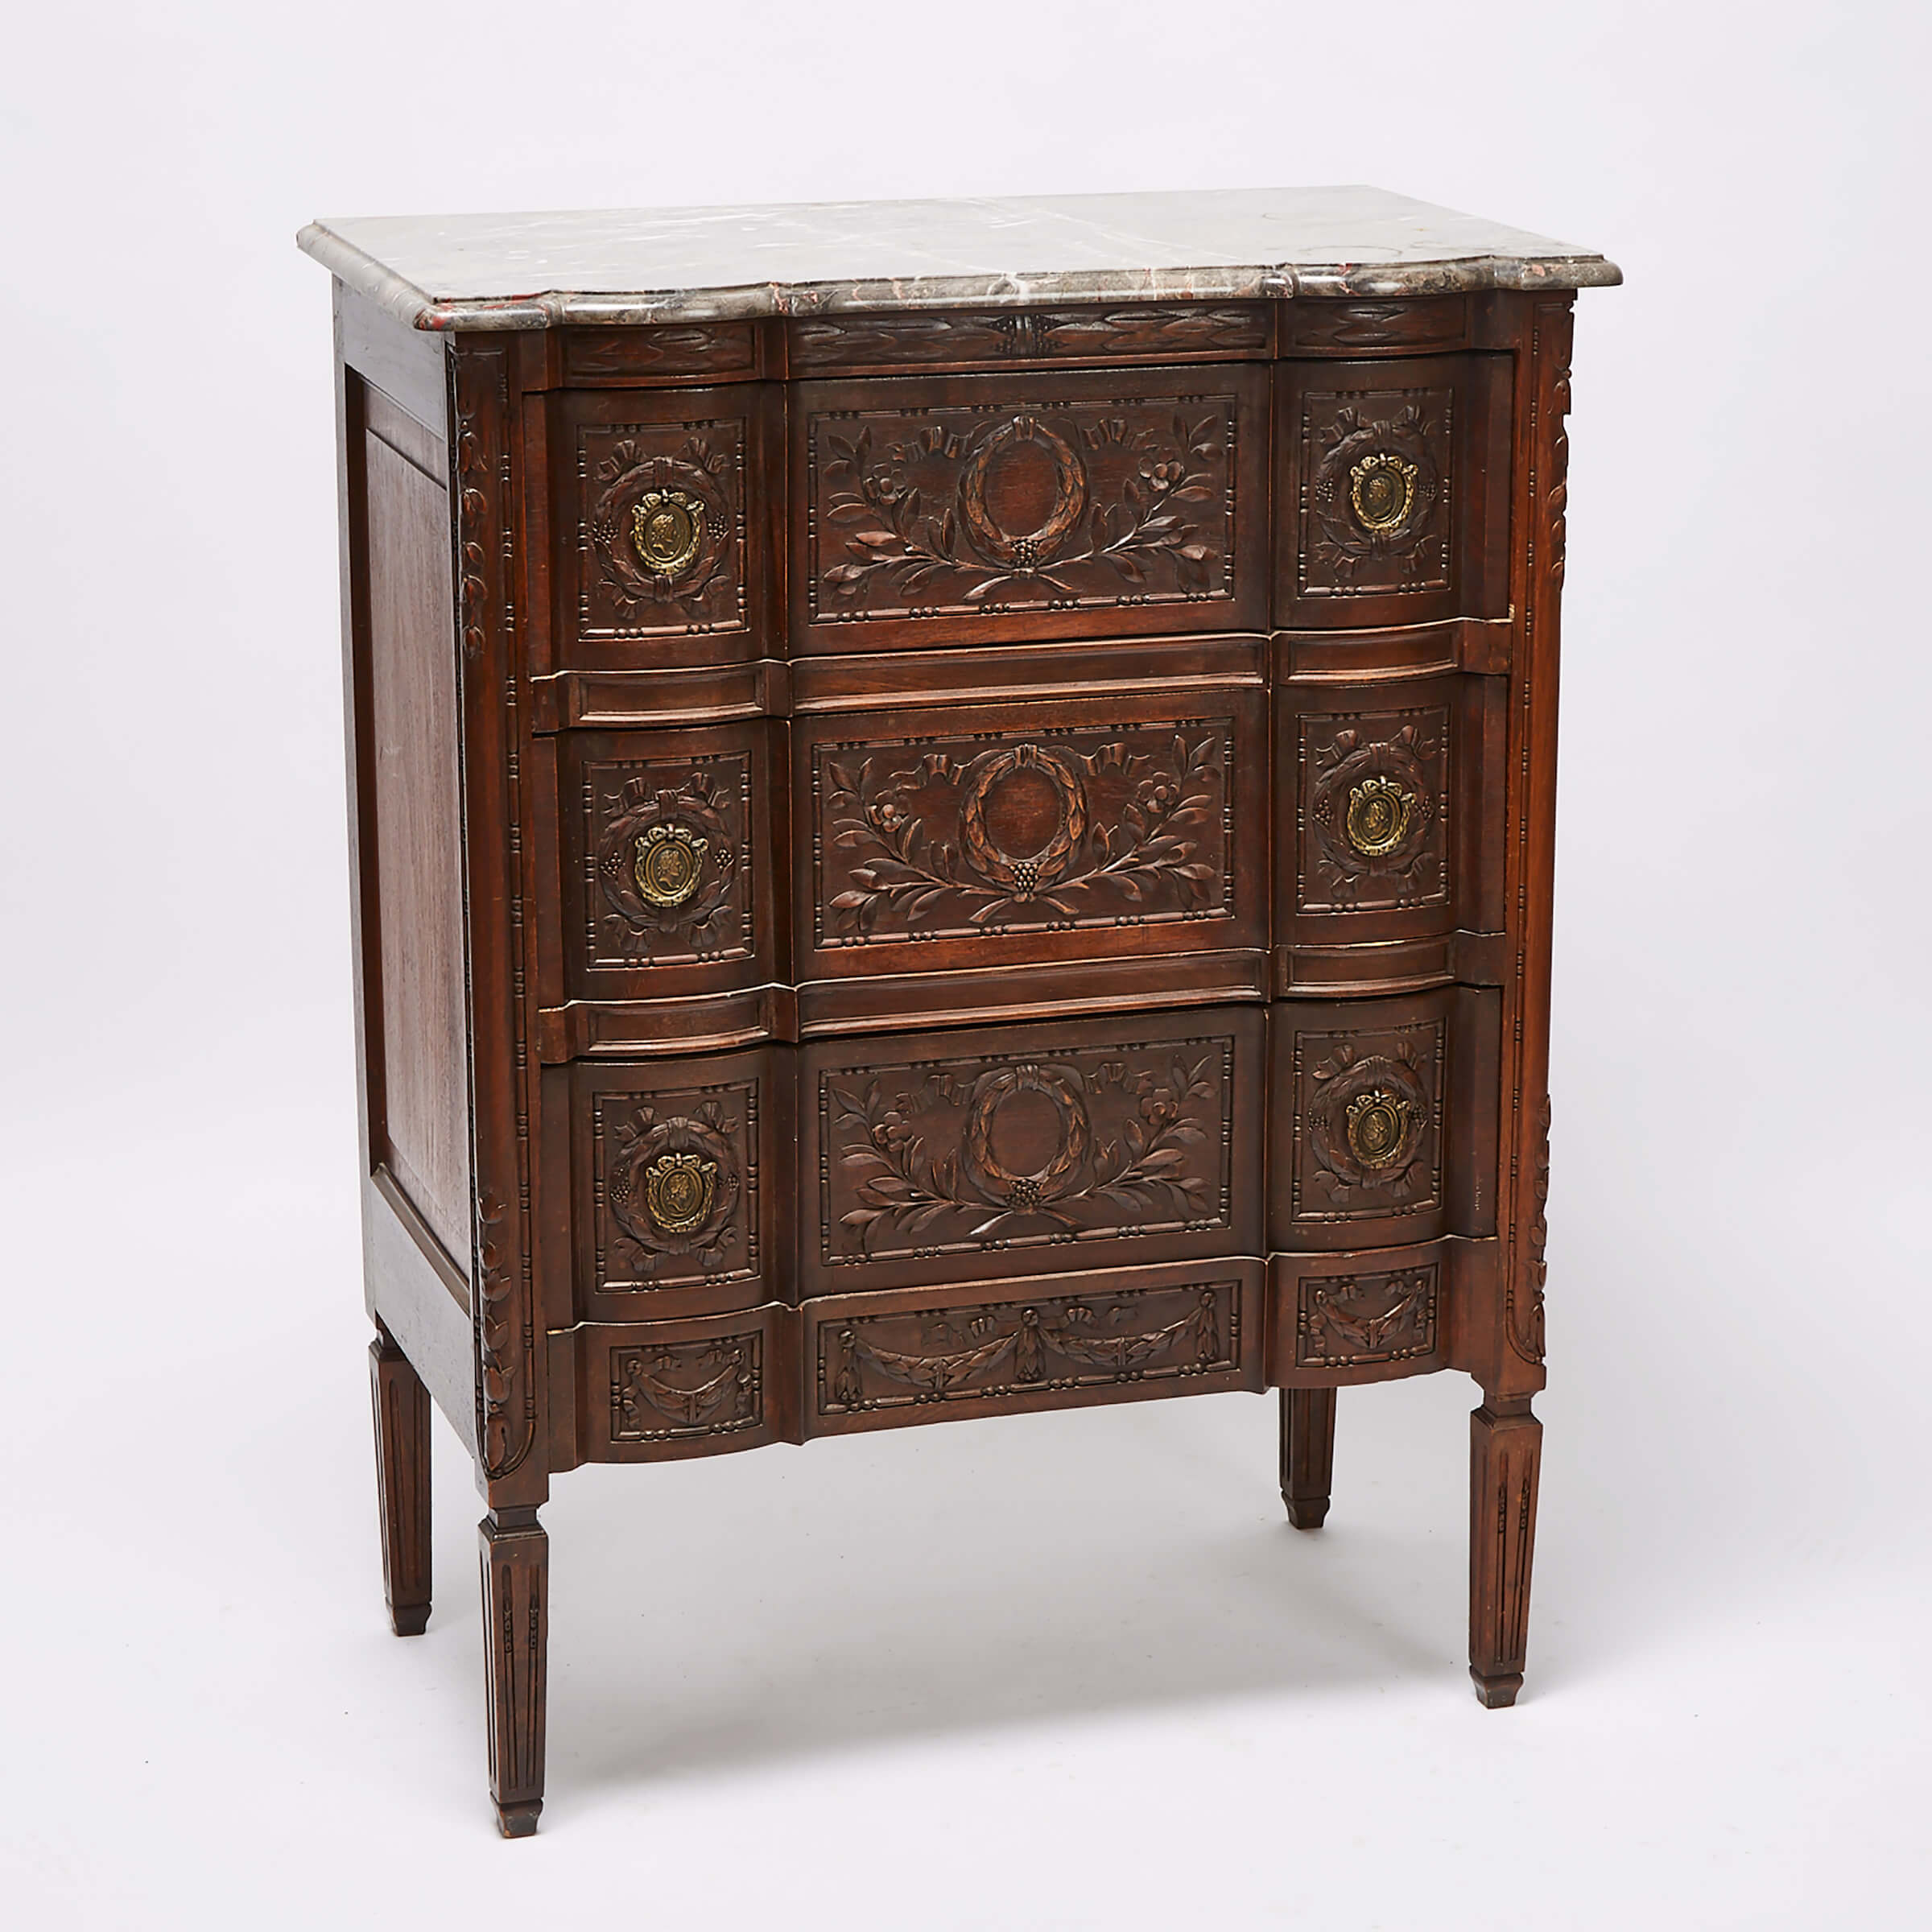 Louis XVI Carved Walnut Commode with Marble Top, 18th century